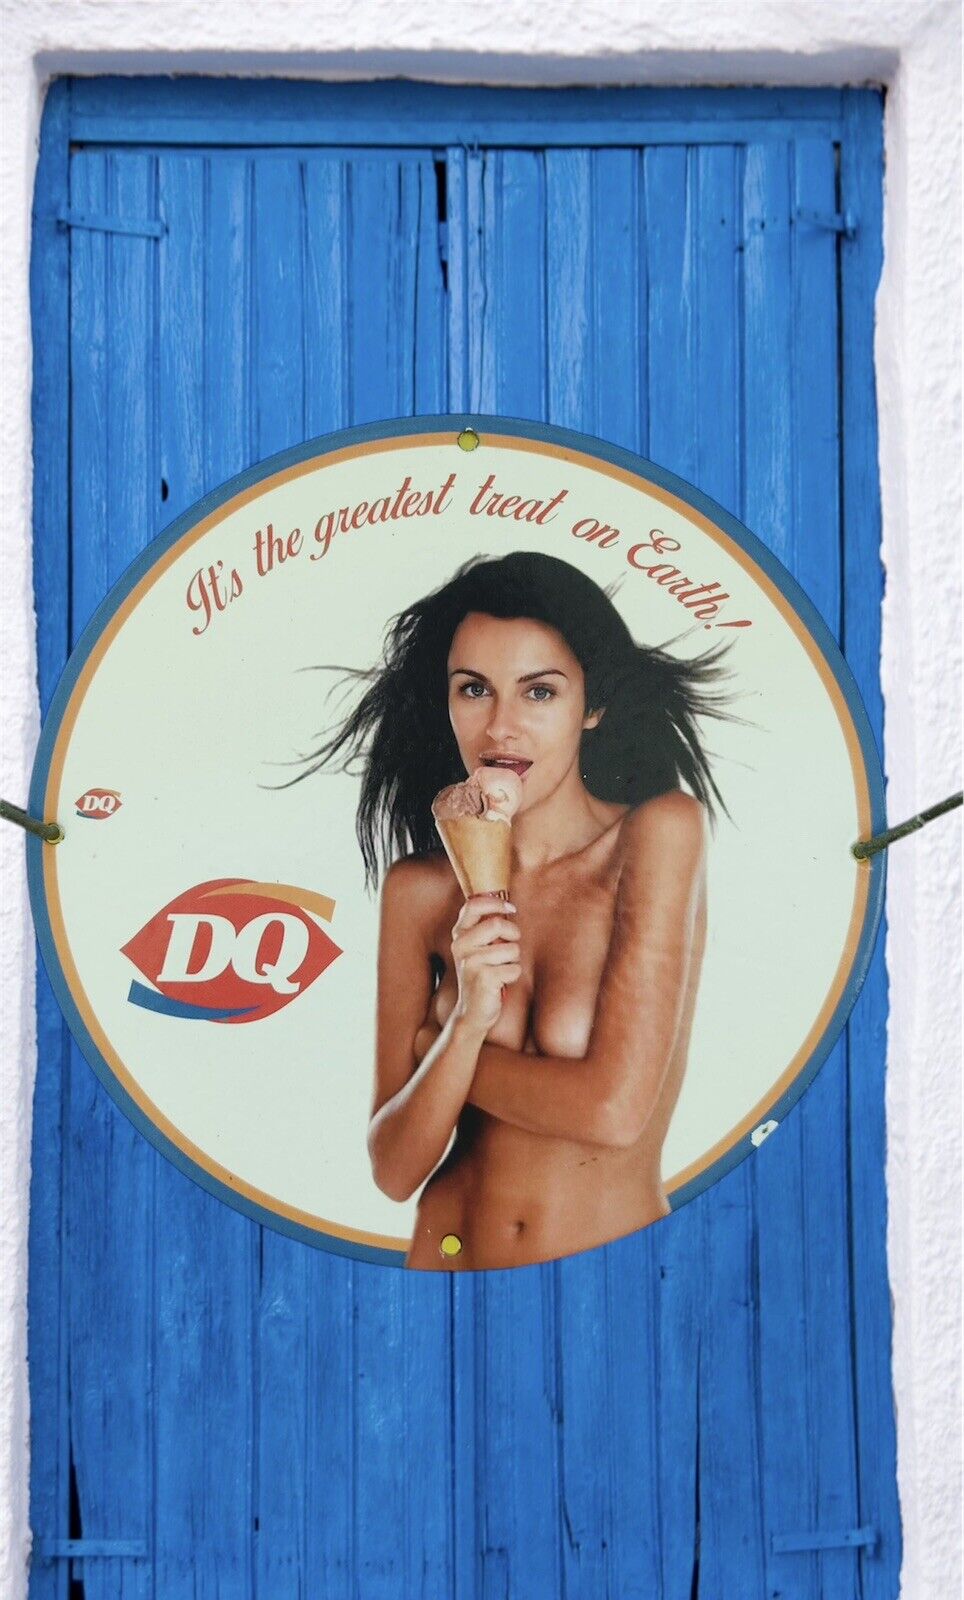 DAIRY QUEEN PINUP BABE PORCELAIN ICE CREAM SALES SERVICE STATION PUMP PLATE SIGN